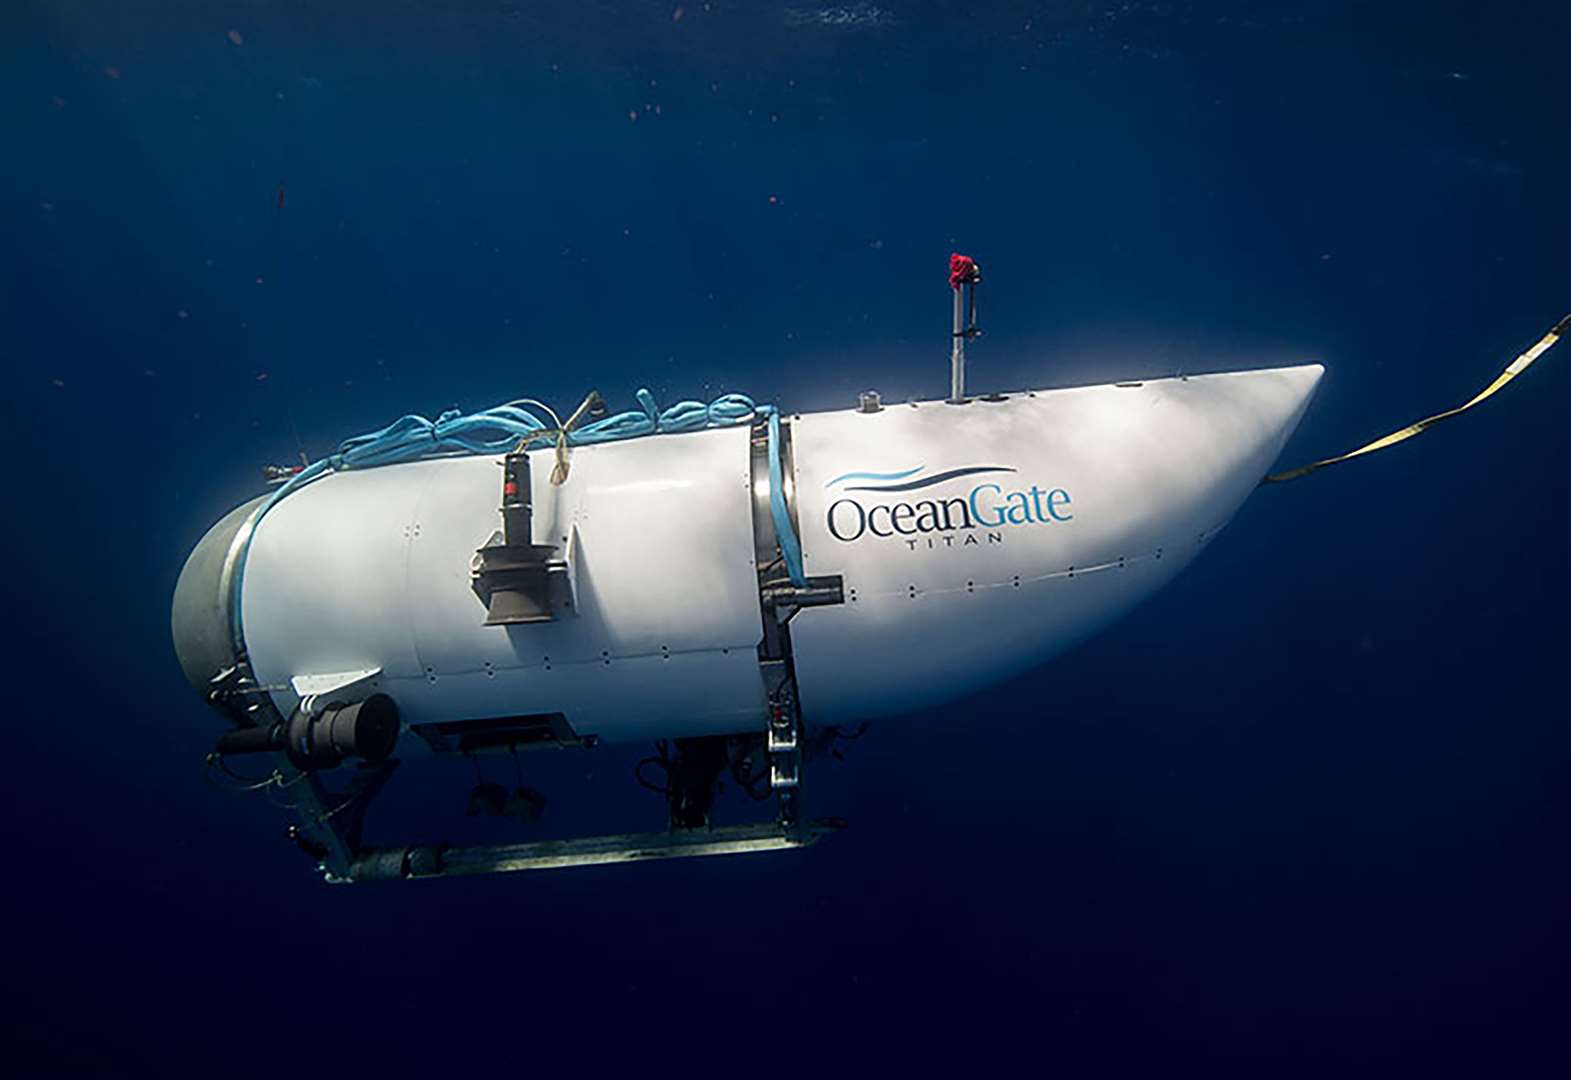 The Titan submersible vessel went missing during a voyage to the Titanic shipwreck (OceanGate Expeditions/PA)